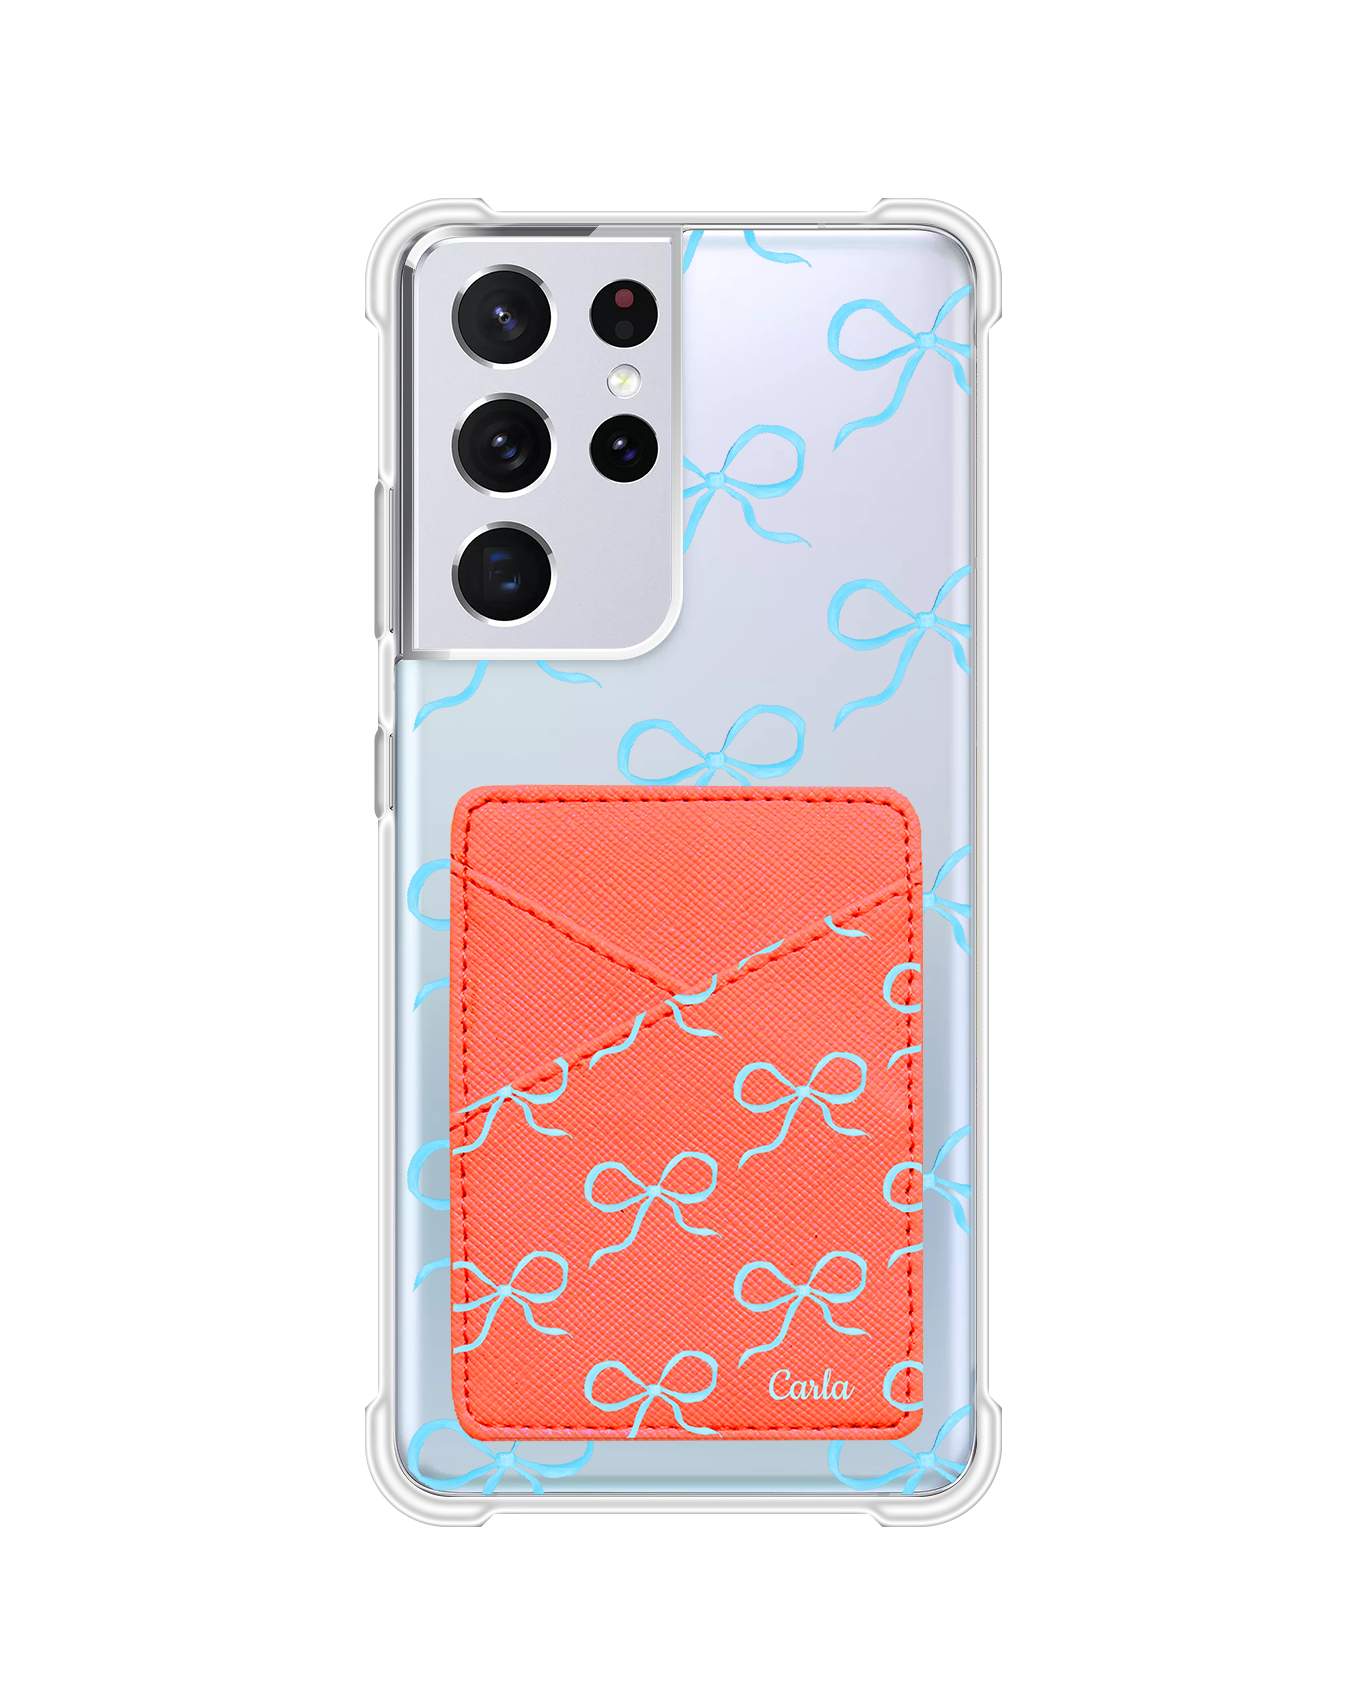 Android Phone Wallet Case - Coquette Blue Bow